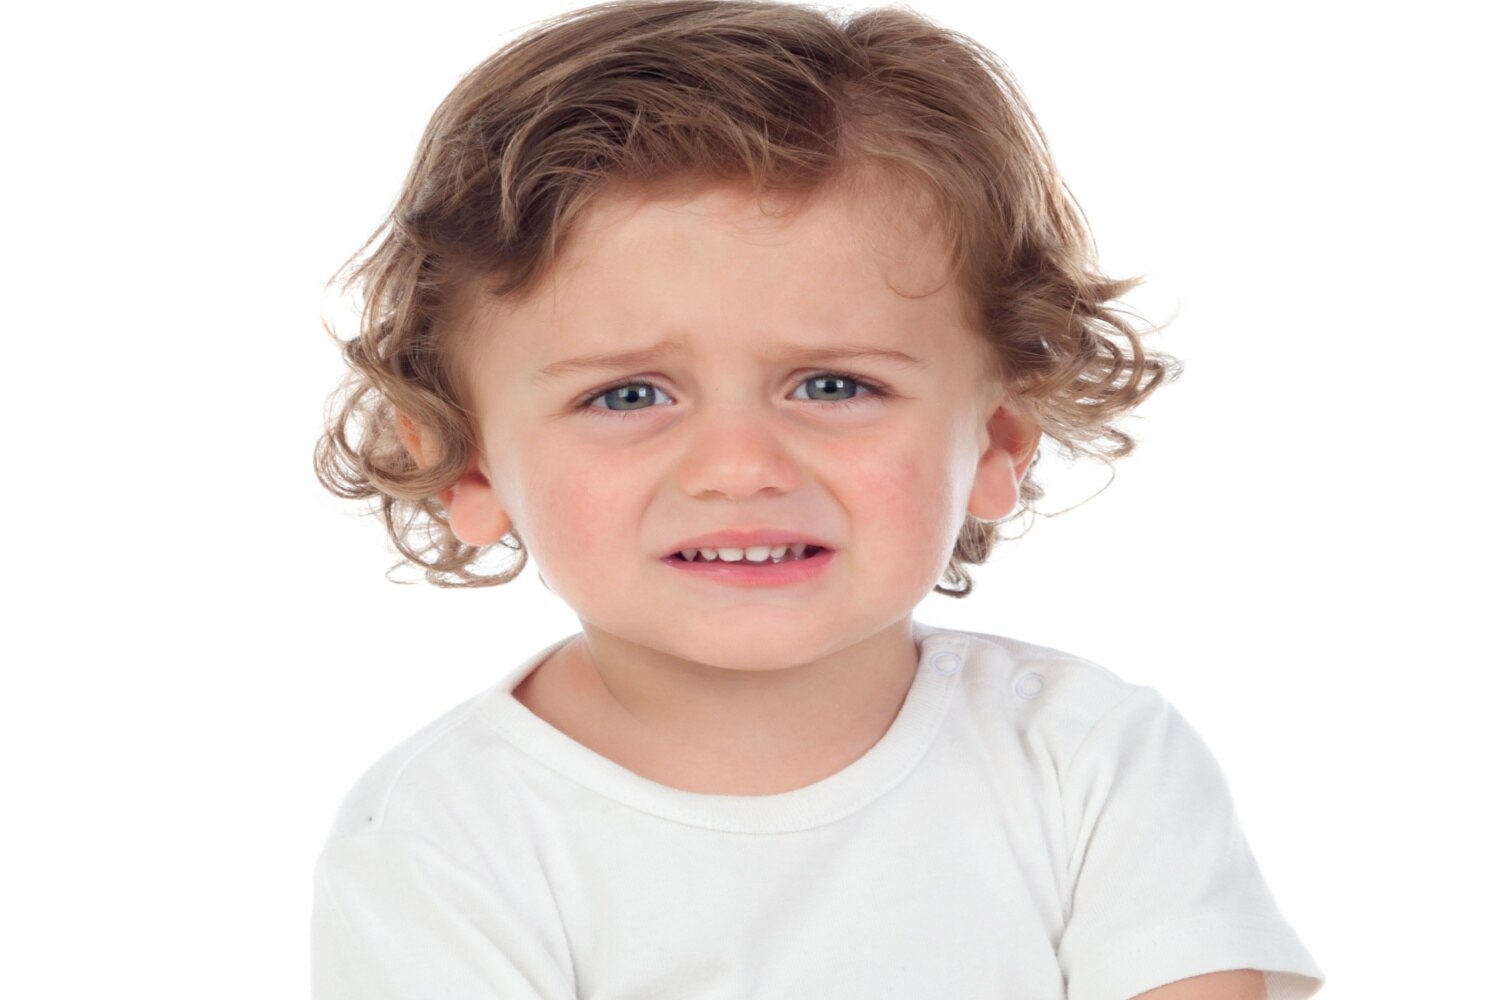 Types of Headaches in Toddlers